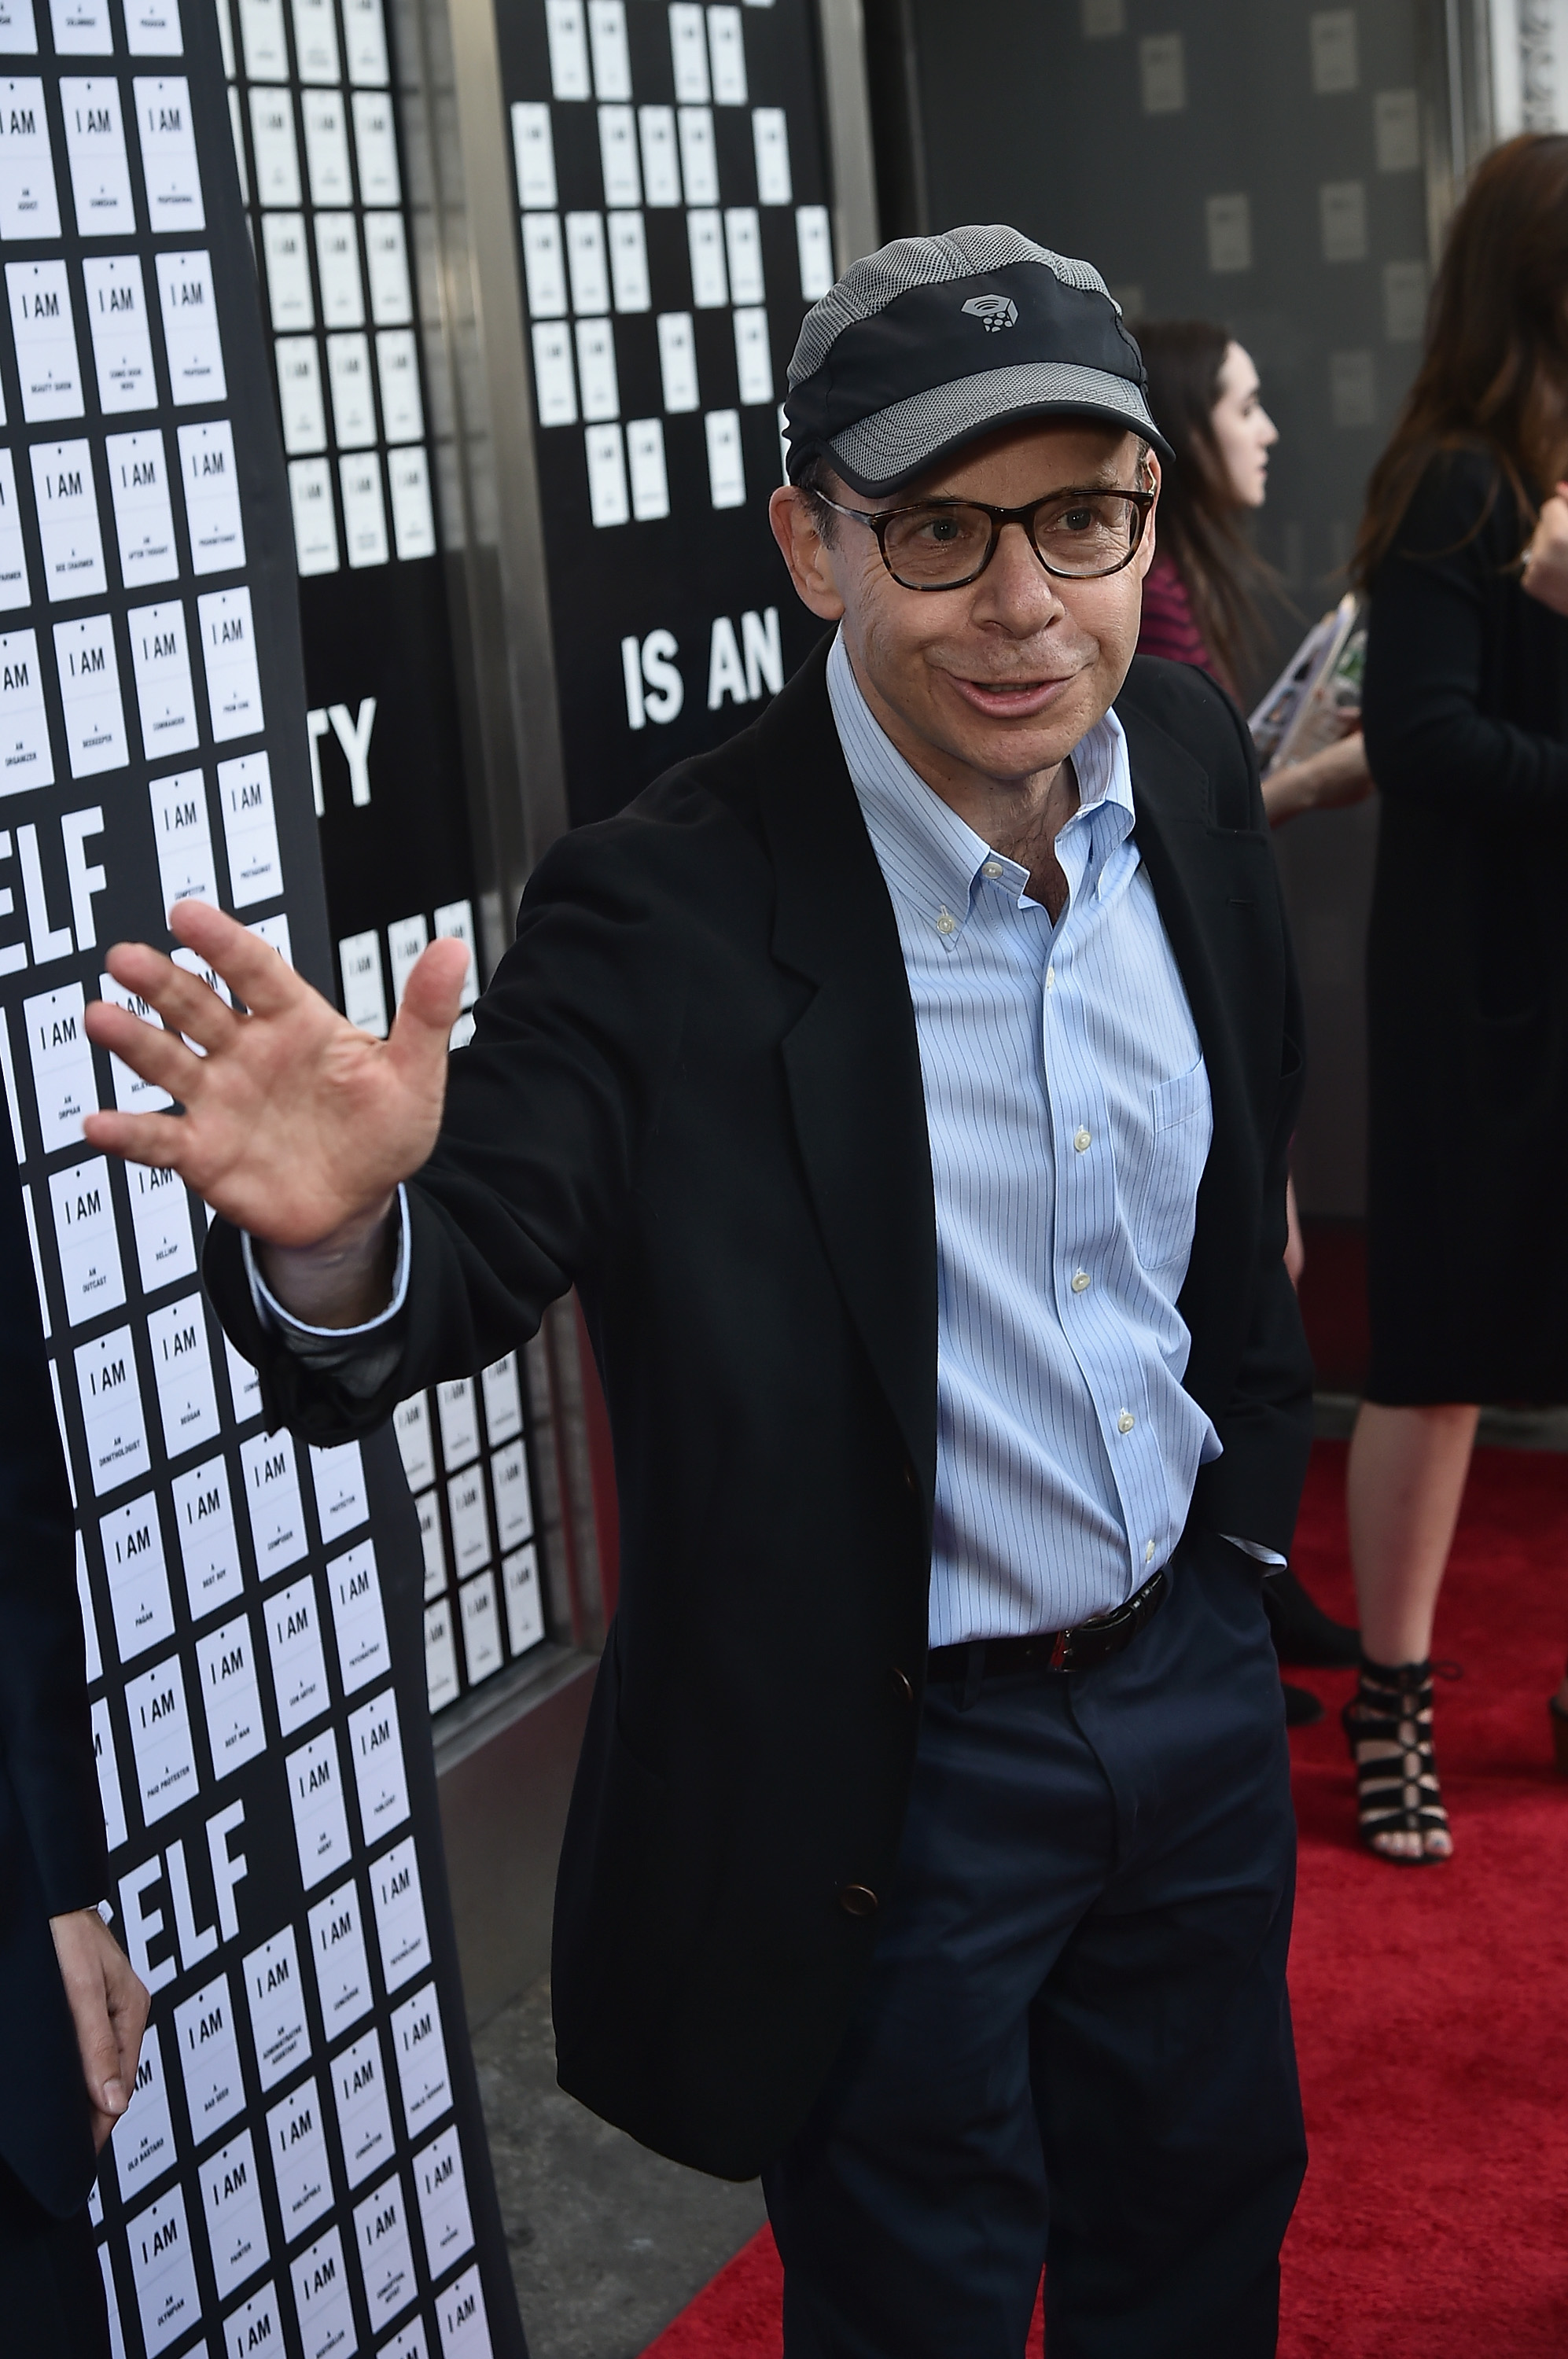 Rick Moranis attends "In & Of Itself" Opening Night at Daryl Roth Theatre on April 12, 2017 in New York City. | Source: Getty Images